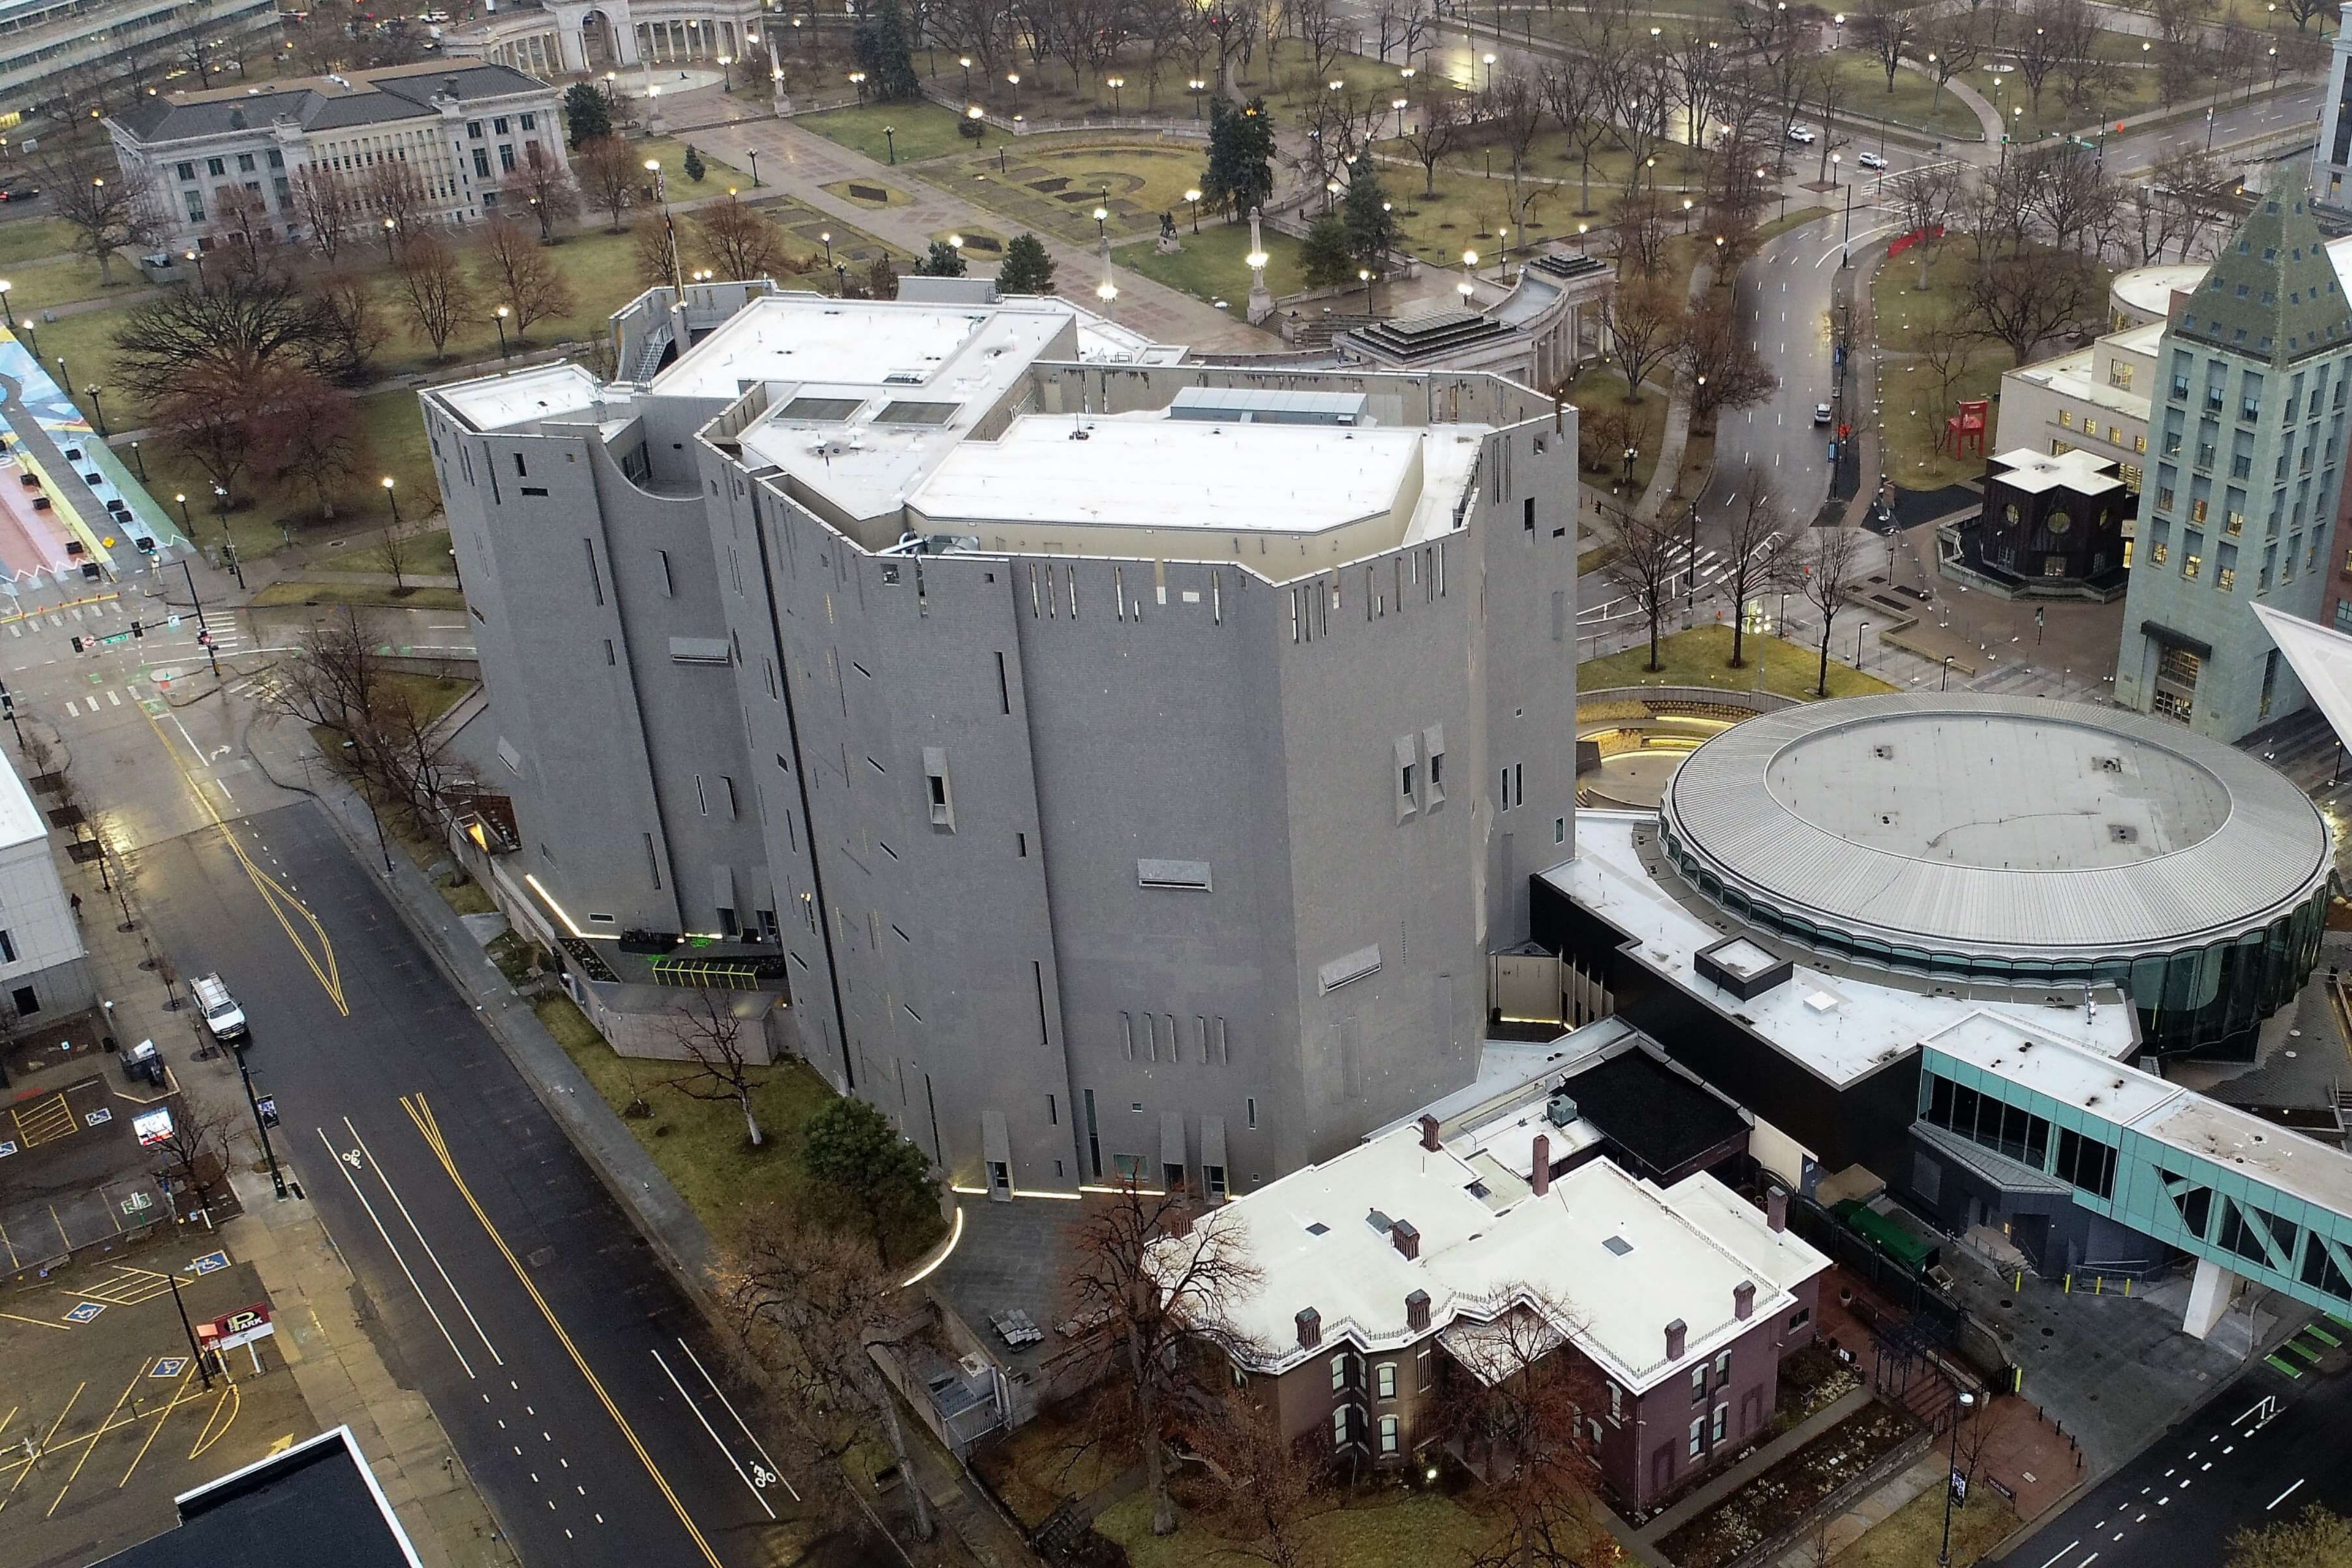 Aerial view of the Denver Art Museum showing a white Sarnafil roof overlooking the city